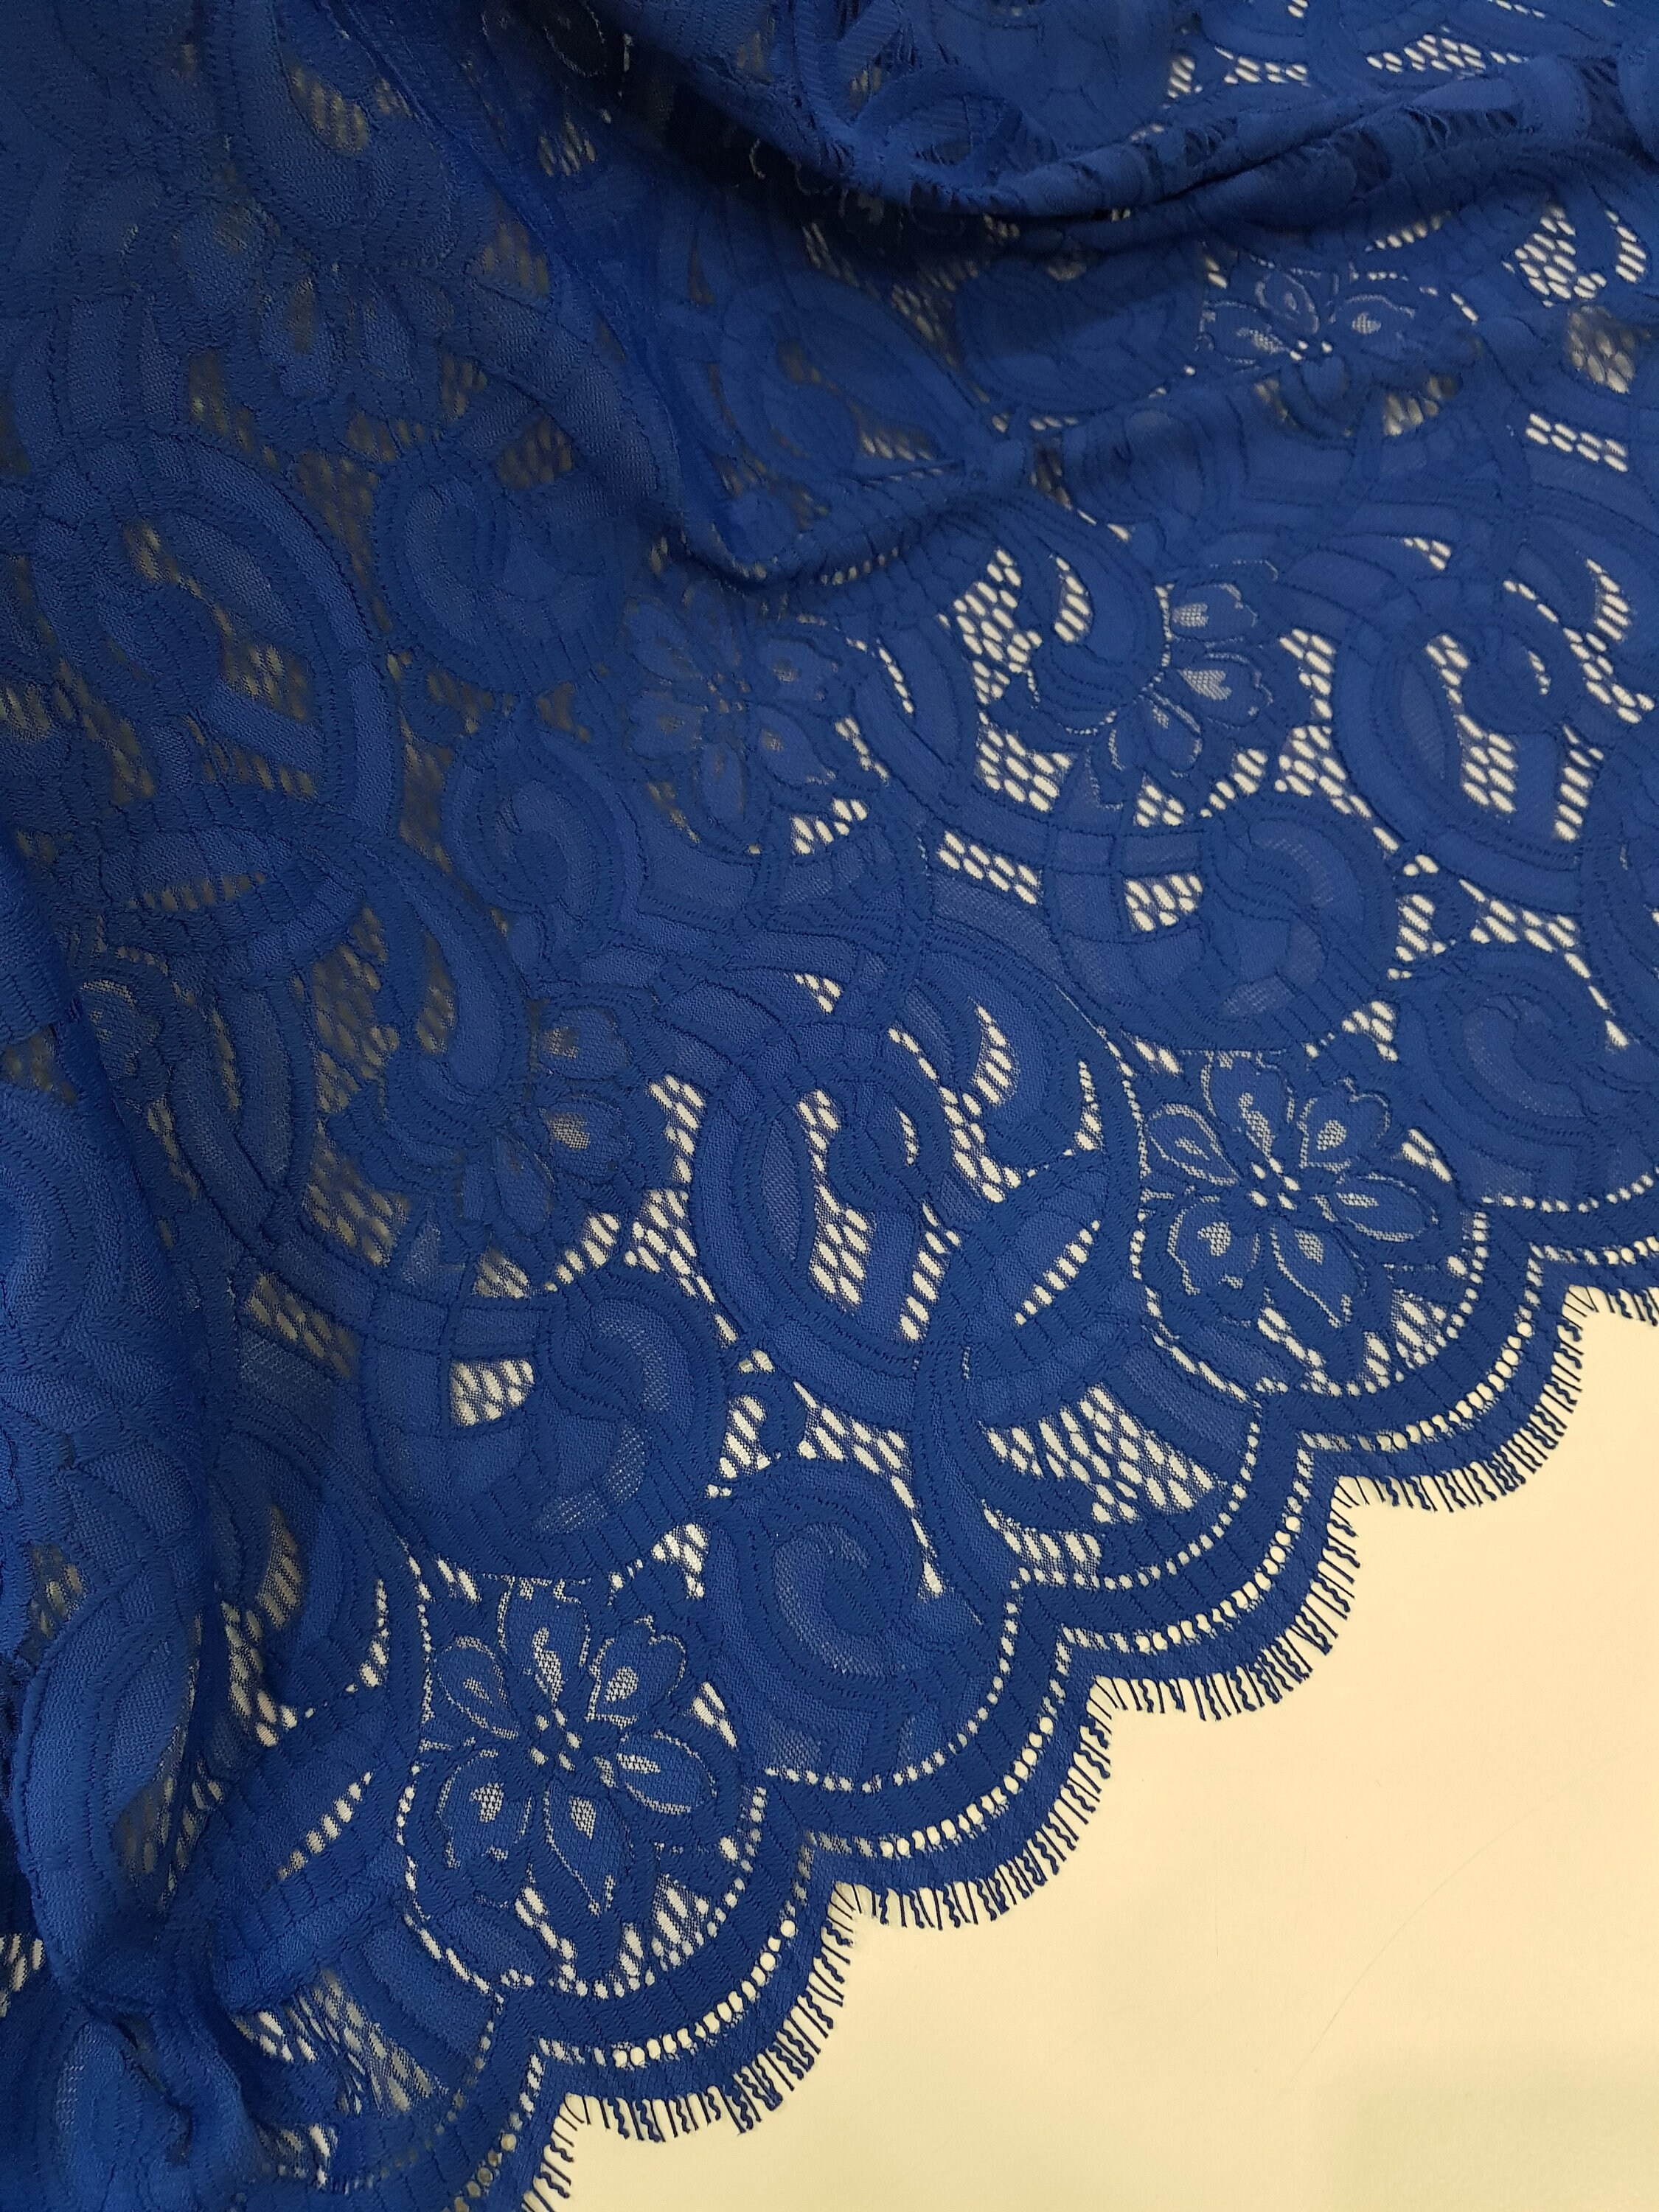 Blue lace fabric by the yard France Lace Alencon Lace | Etsy